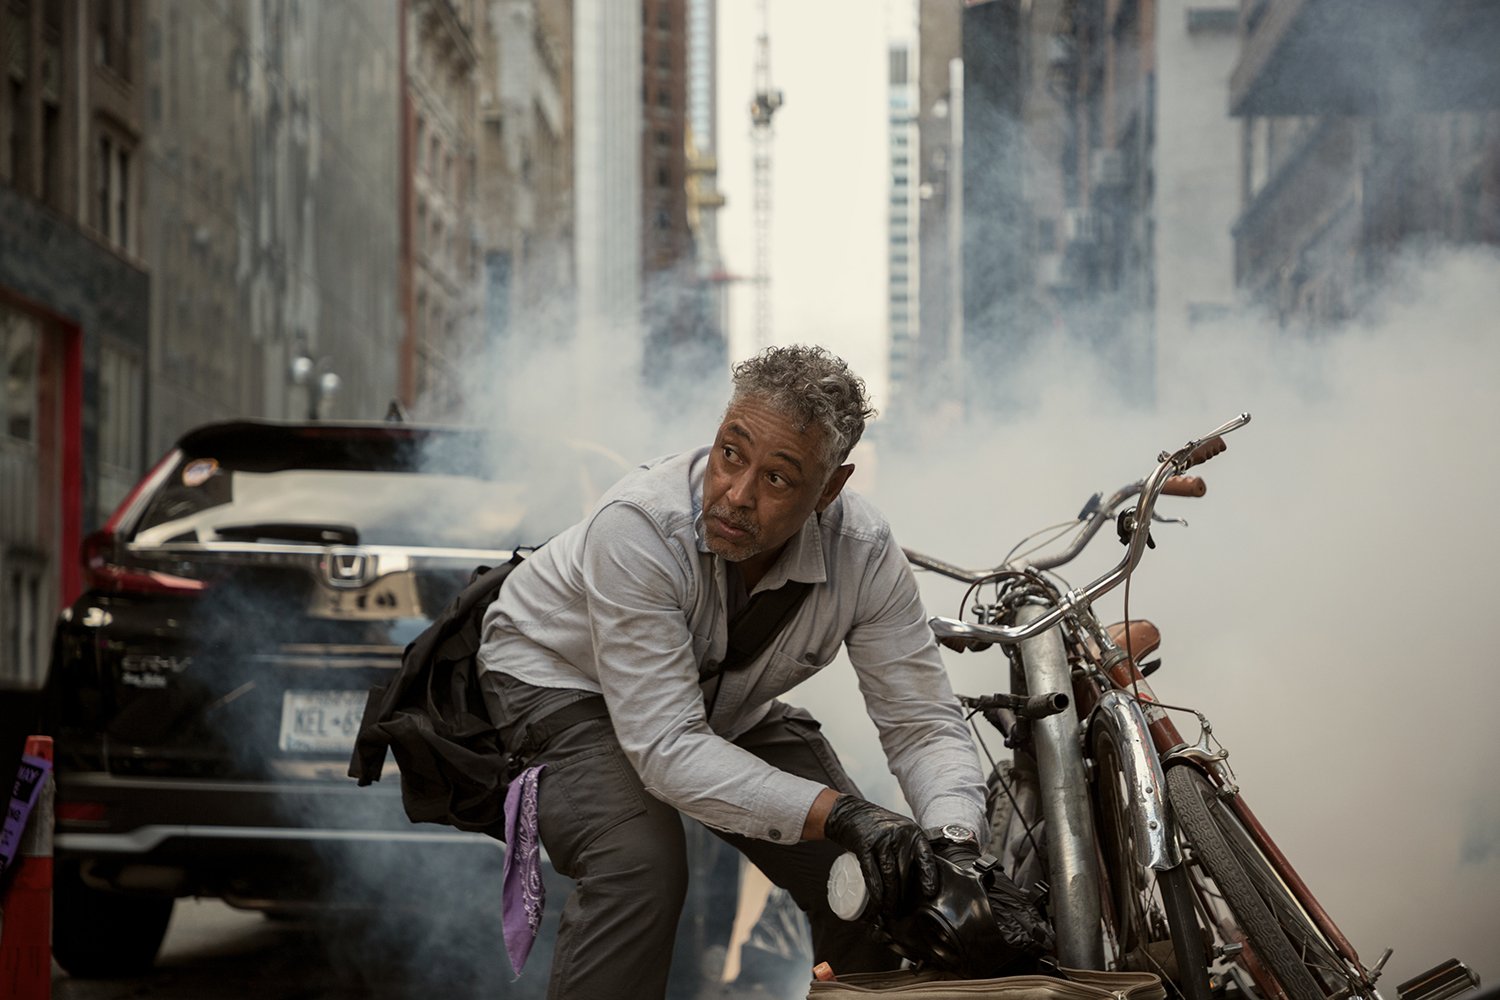 Giancarlo Esposito as Leo Pap locking a bicycle in Kaleidoscope, which is loosely based on a true story.